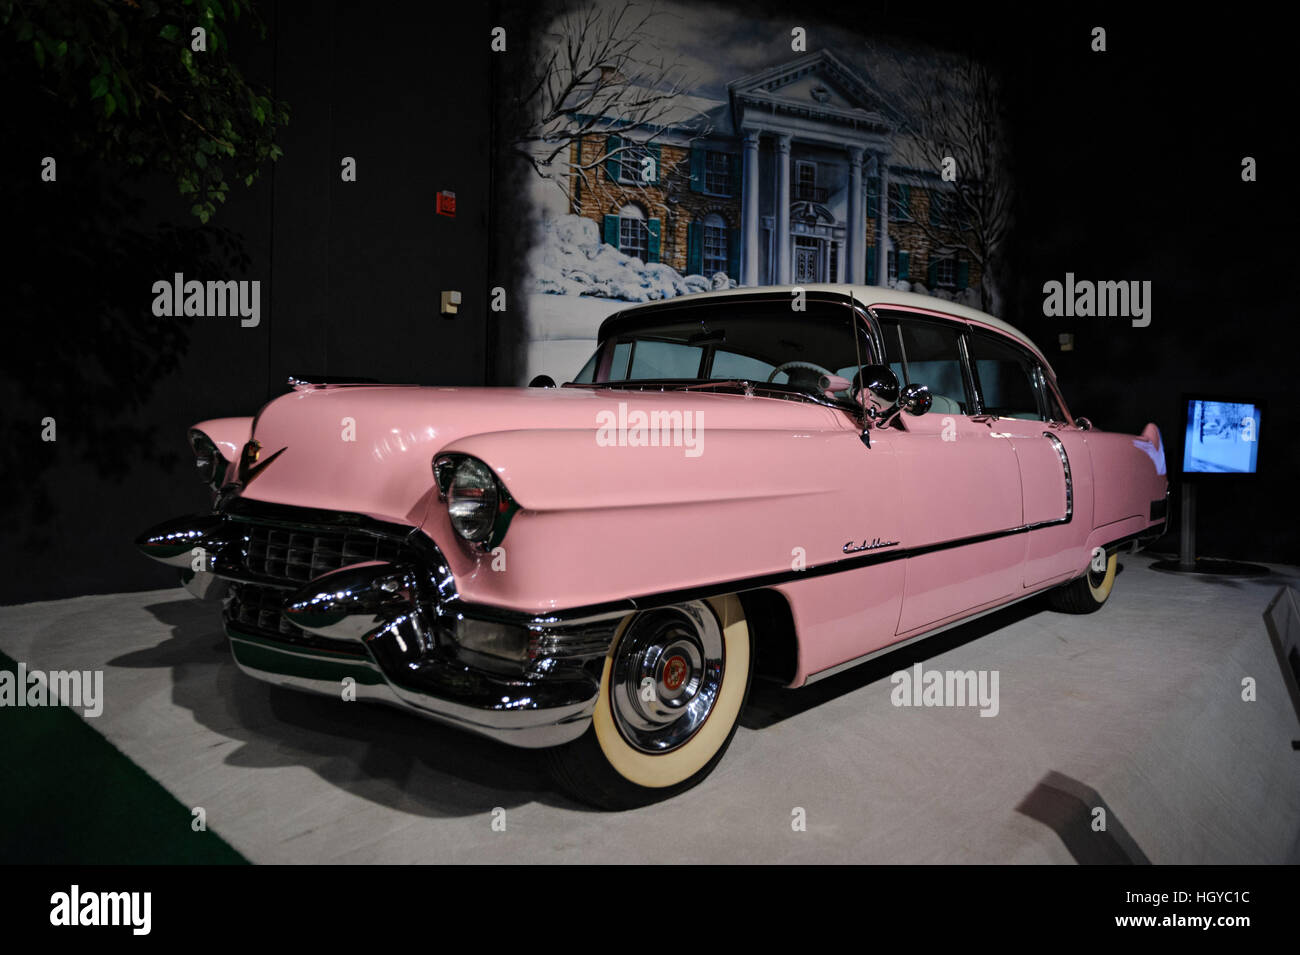 Classic American Car On Display At The Elvis Presley Automotive Museum Graceland Memphis Tennessee Usa Stock Photo - Alamy